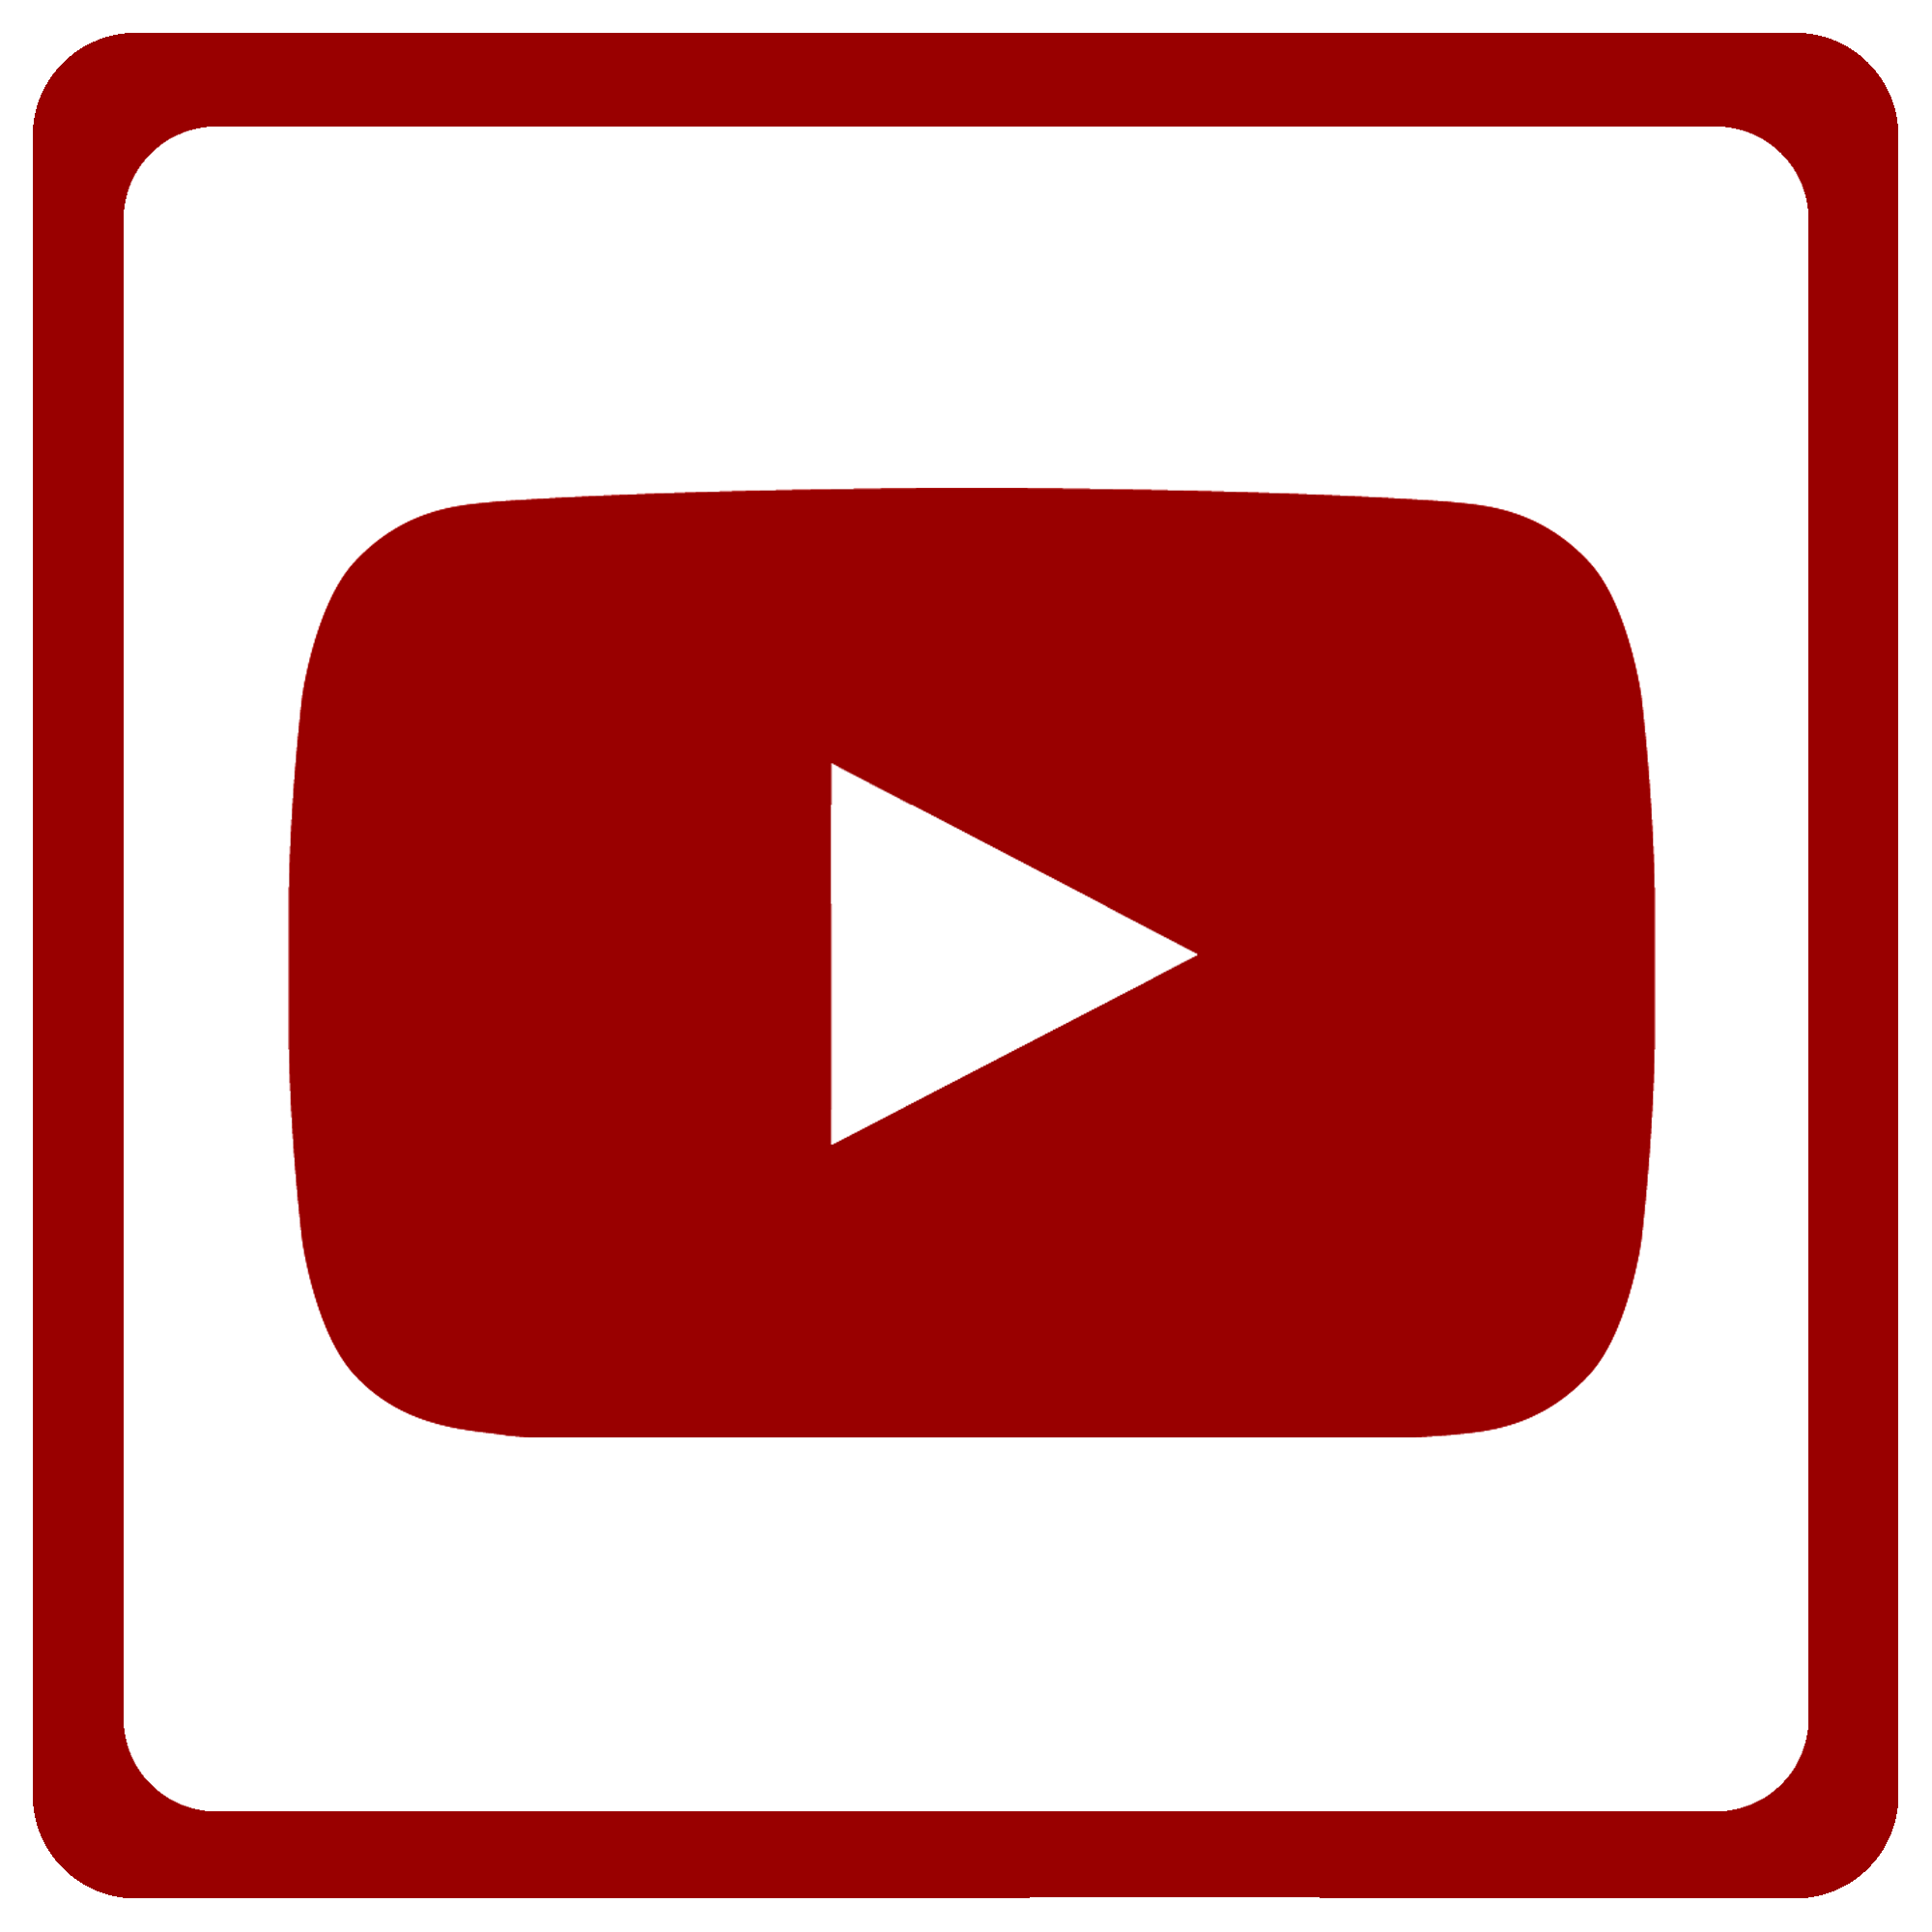 DONMAR on Youtube